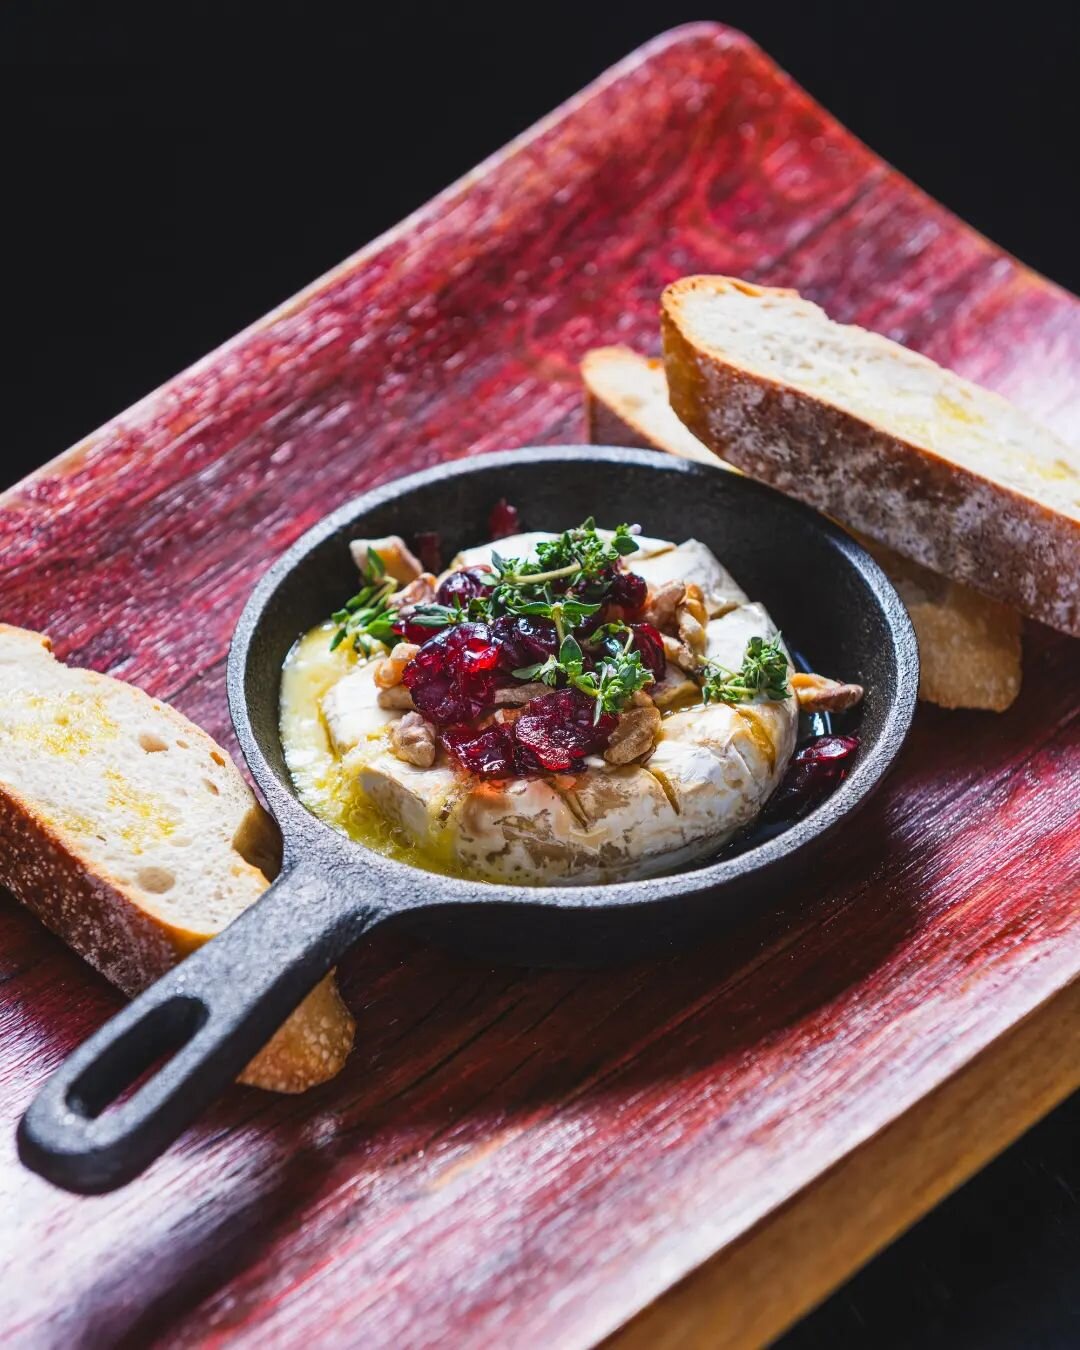 I had a fun day trip to Blenheim last week capturing some beautiful food for the team @quenchrestaurantandbar .

The Baked Brie with Maple Glaze, Cranberries, Walnuts and Baguette ... Caught my eye 👀 🤤

#cheese #brie #lunch
#brandstory #contentcrea